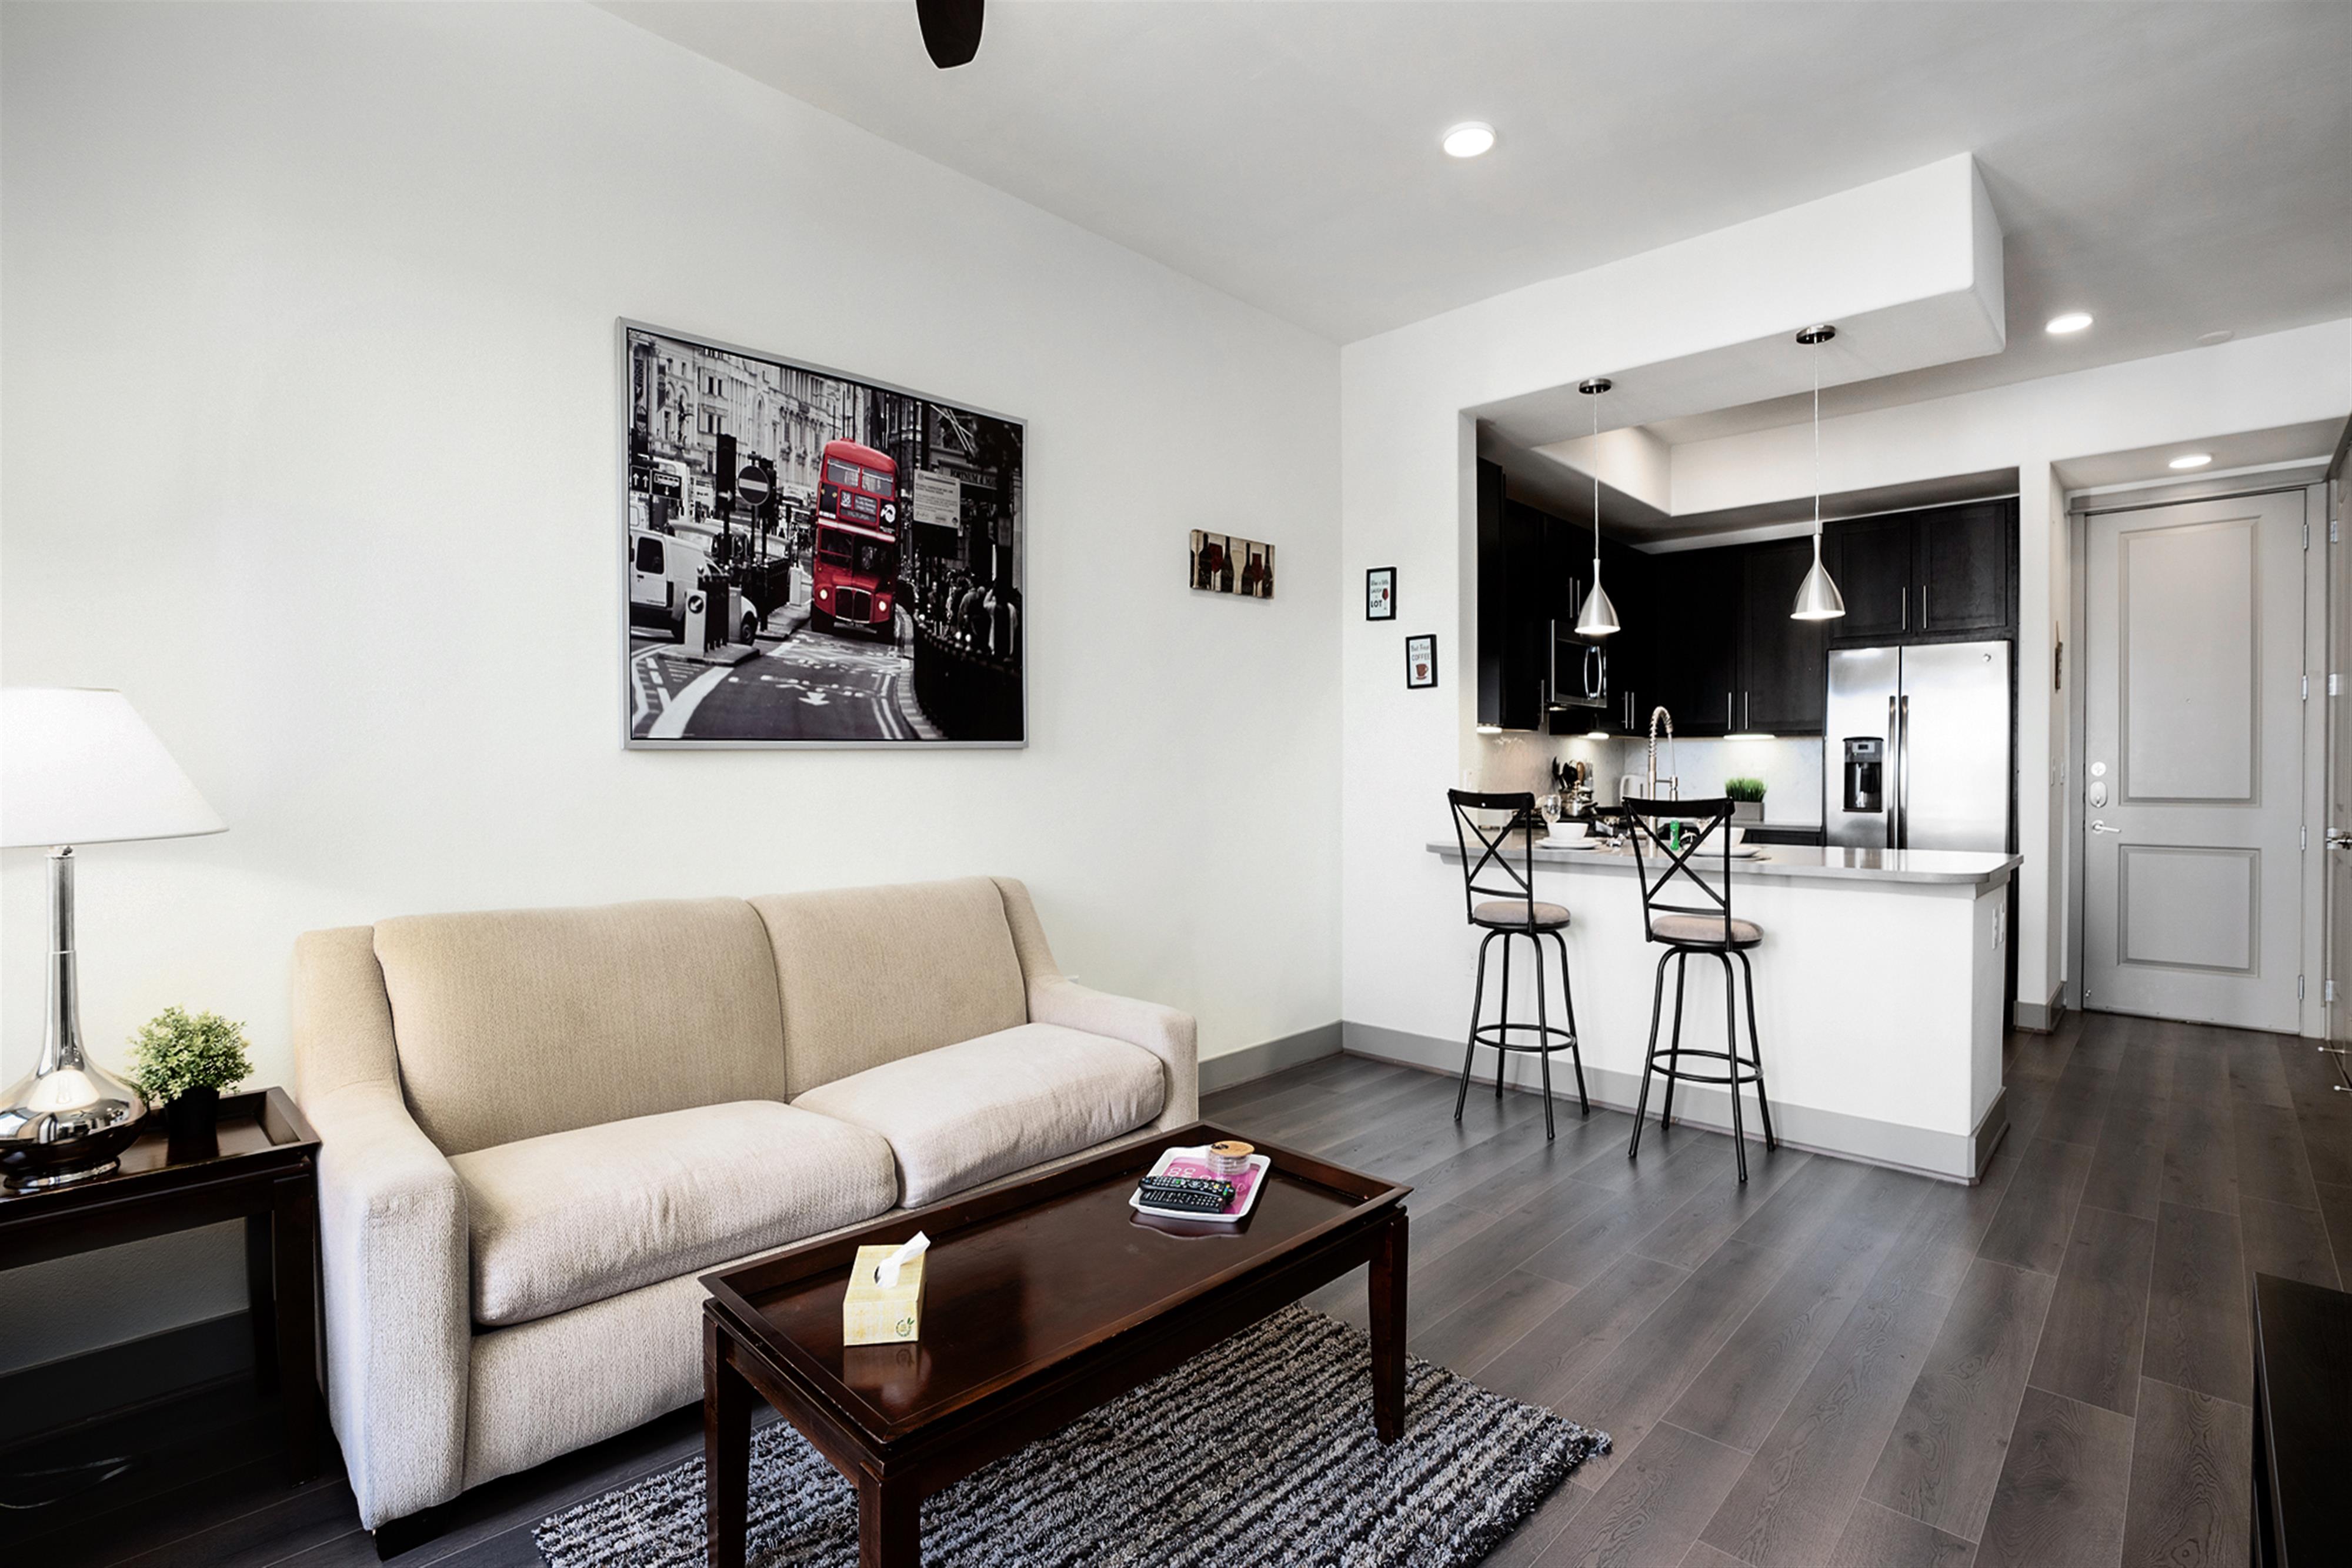 Furnished apartments in Houston